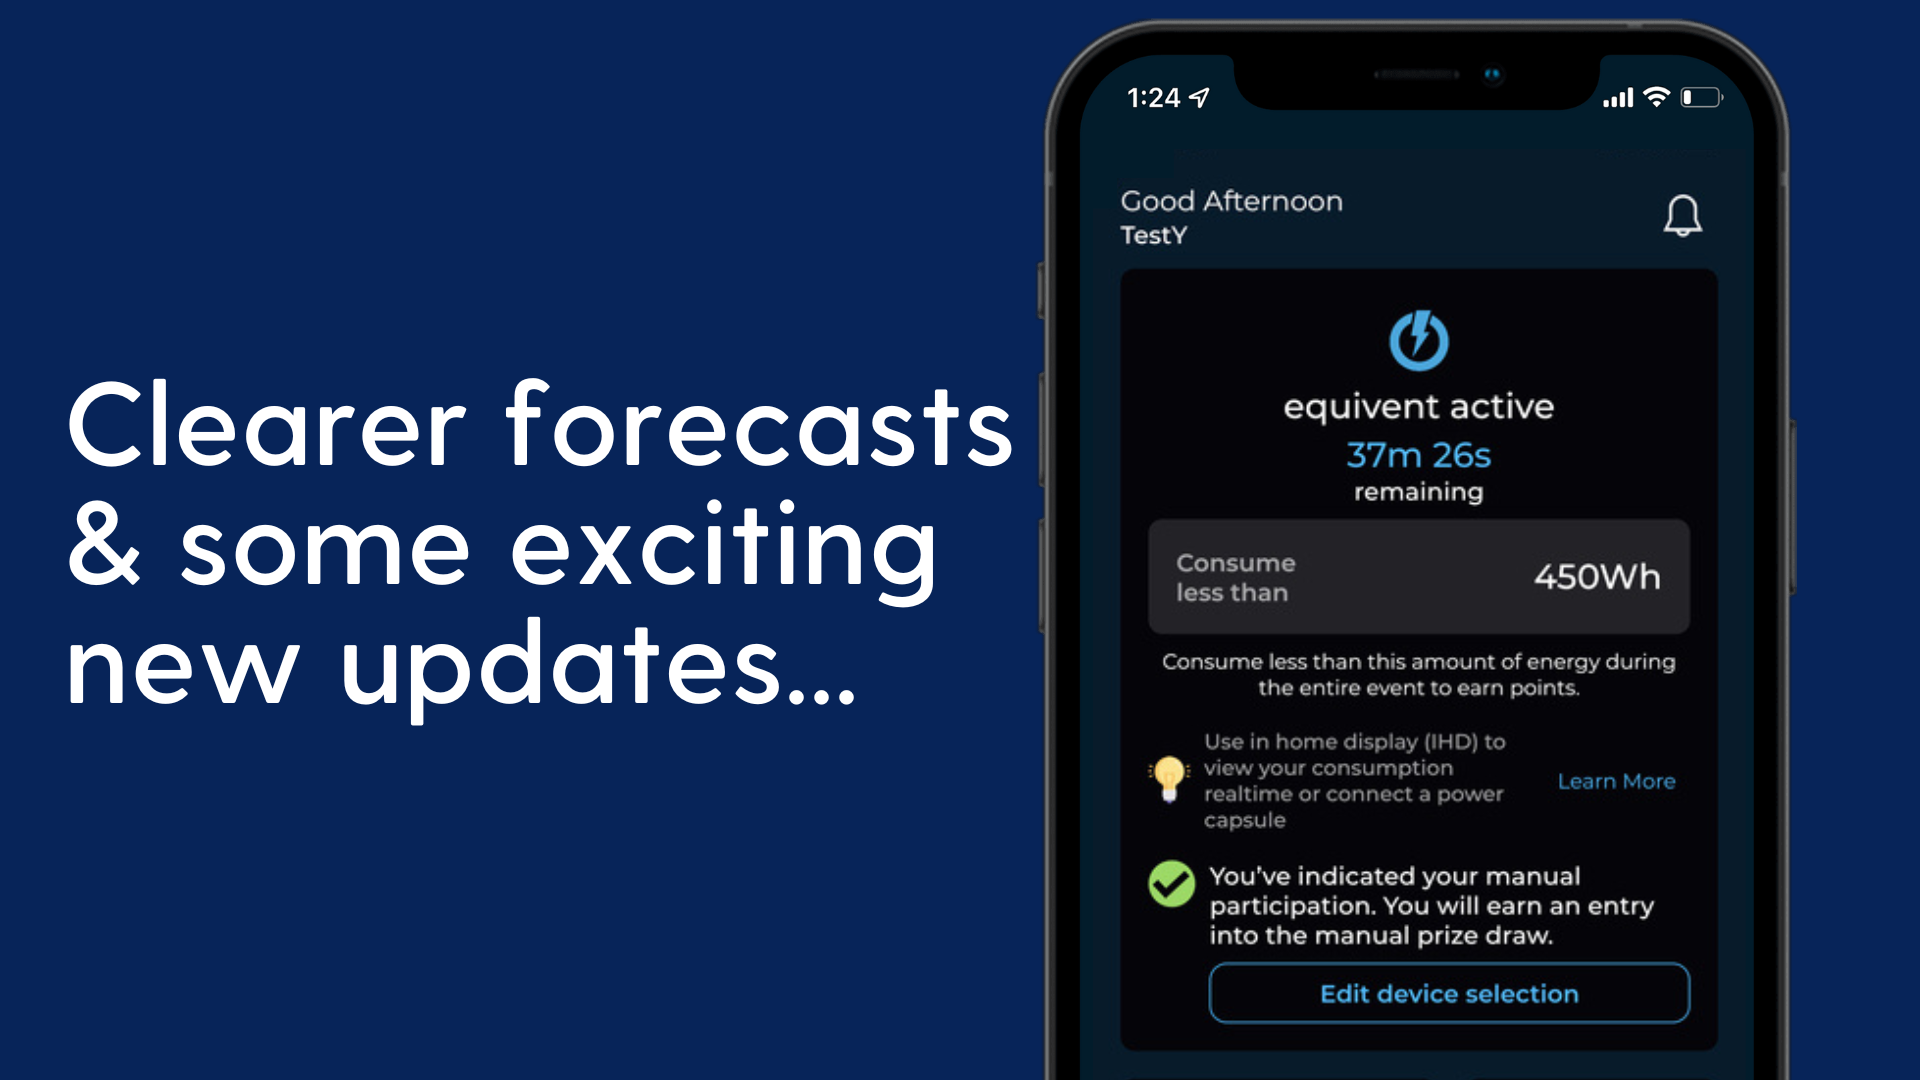 Clearer forecasts & some exciting new updates...